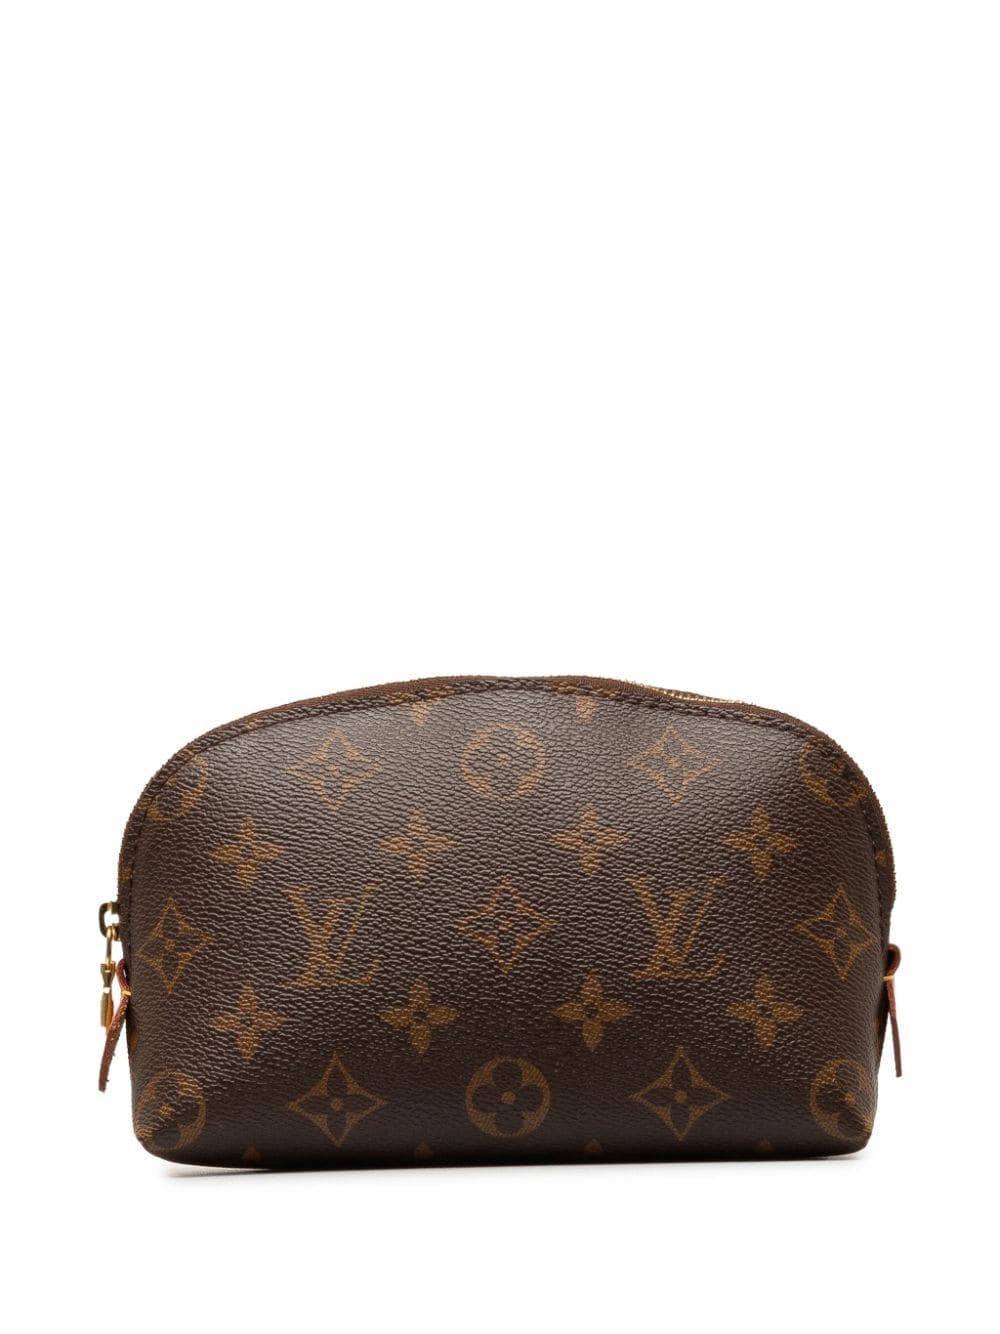 Pre-owned Louis Vuitton 2019 Cosmetic Pm Pouch In Brown